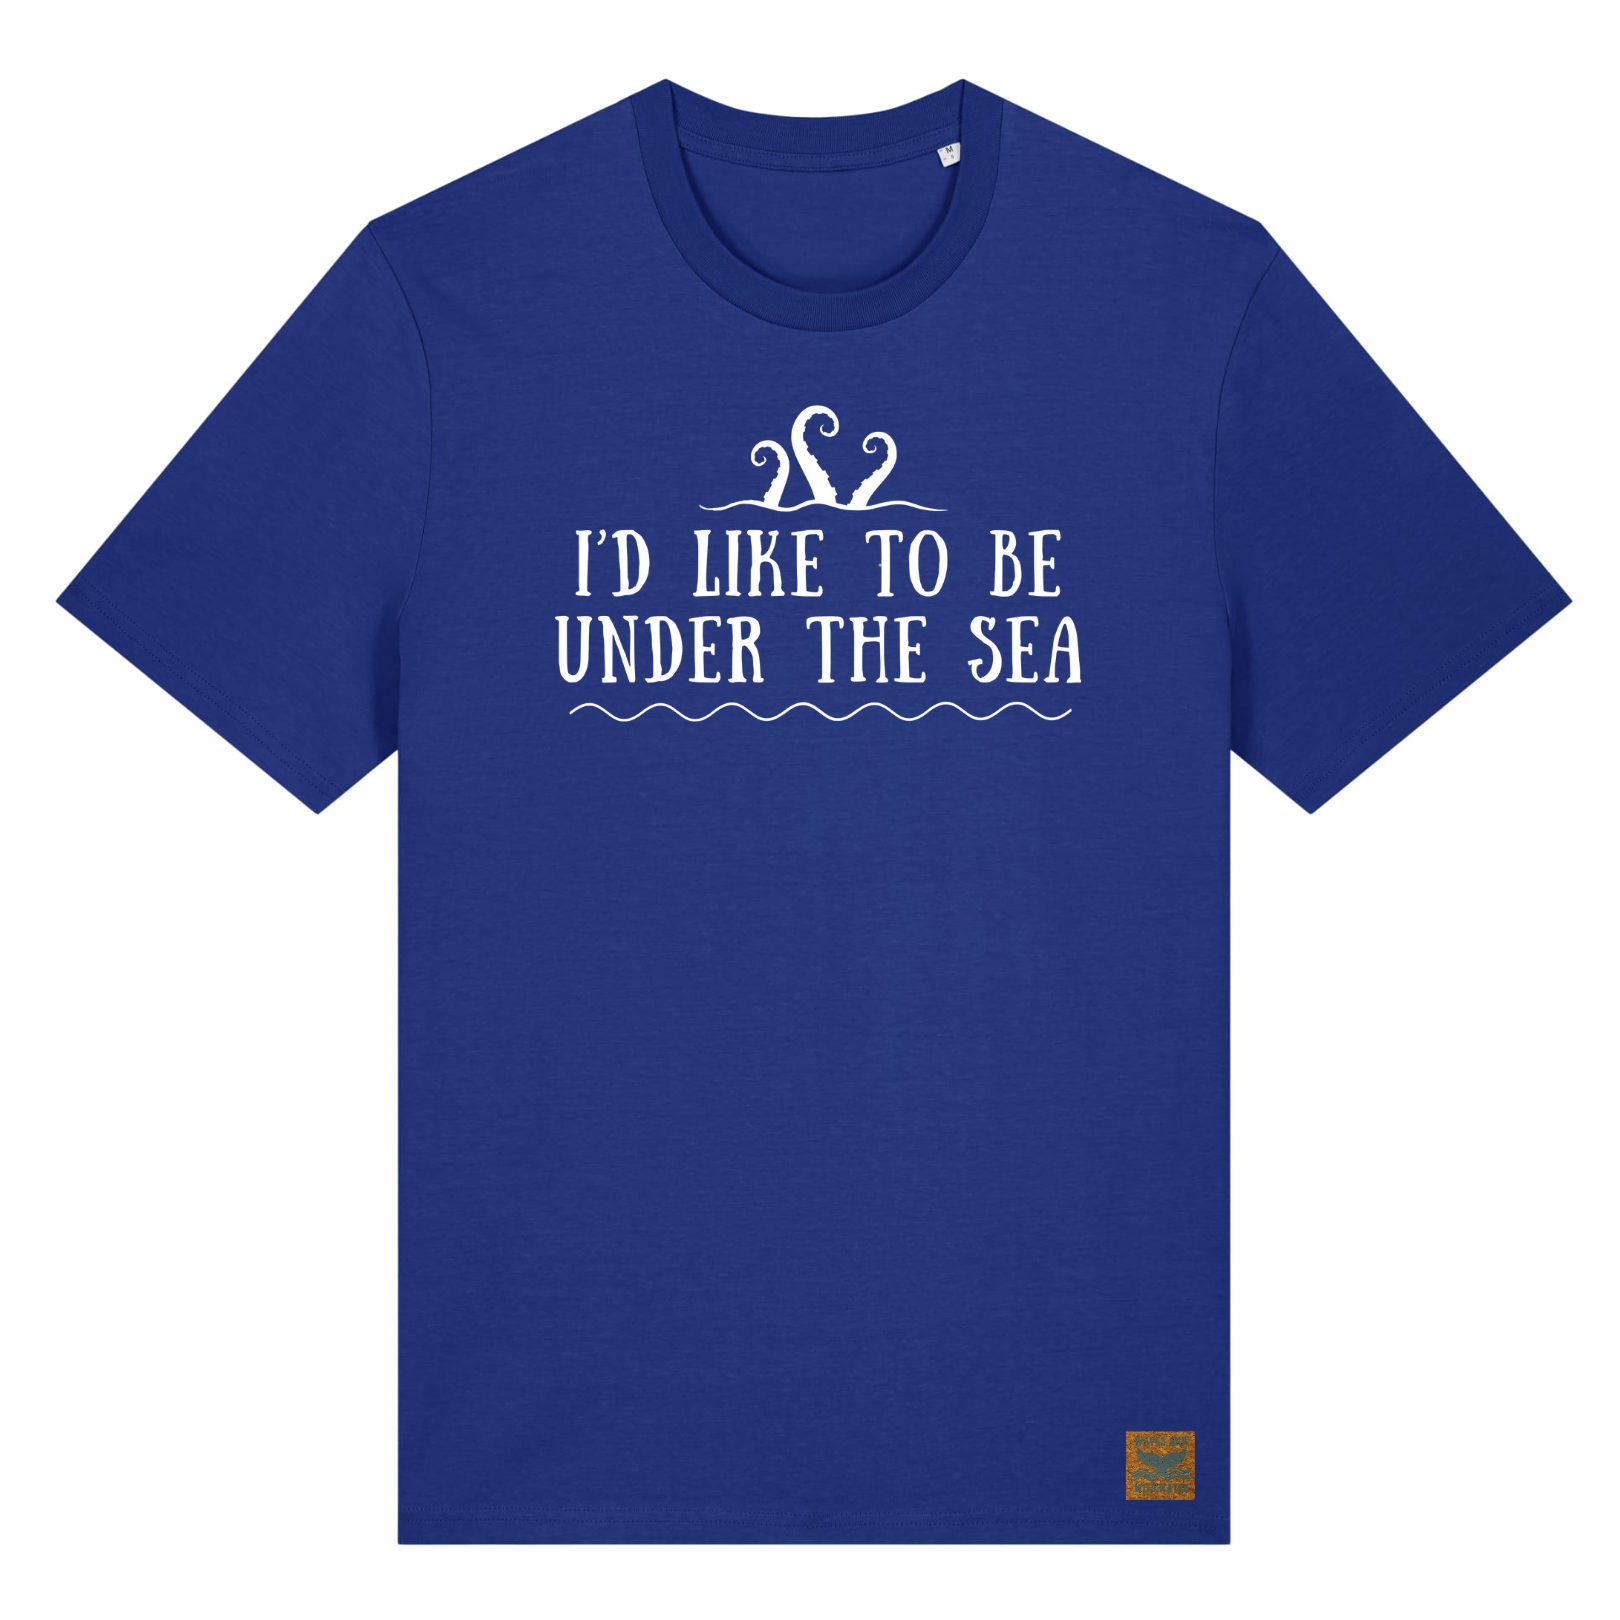 Deep blue t-shirt with white print showing octopus tentacles and the text I'd Like To Be Under The Sea from the Beatles' iconic song Octopus's Garden. We love to wear this tee after having sea swimming adventures at our home on the coast.